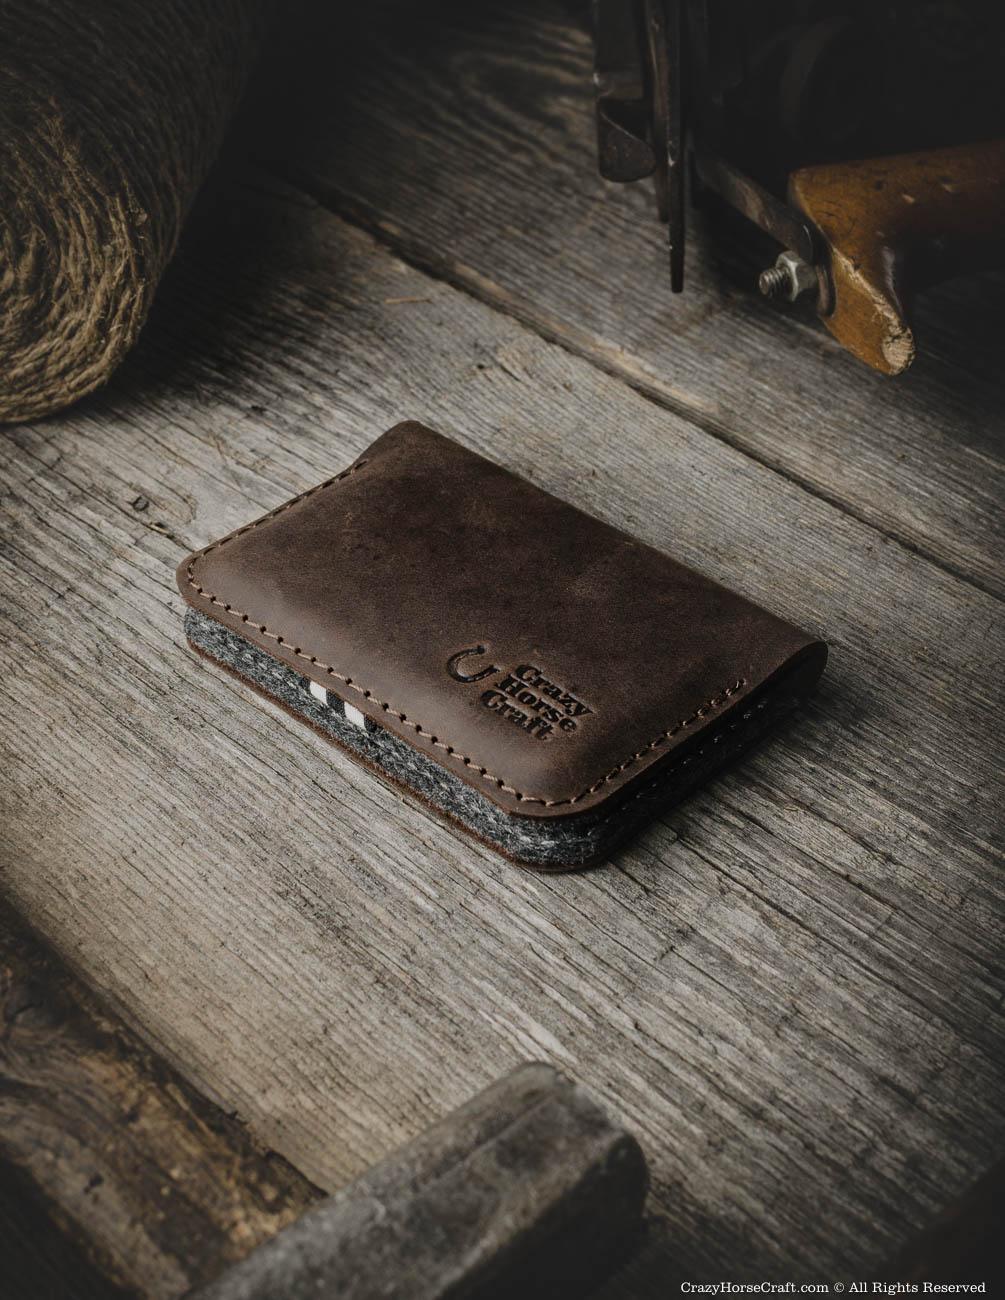 Multi piece Card Holder Wallet with Flap in Genuine Leather Brown / Genuine Leather